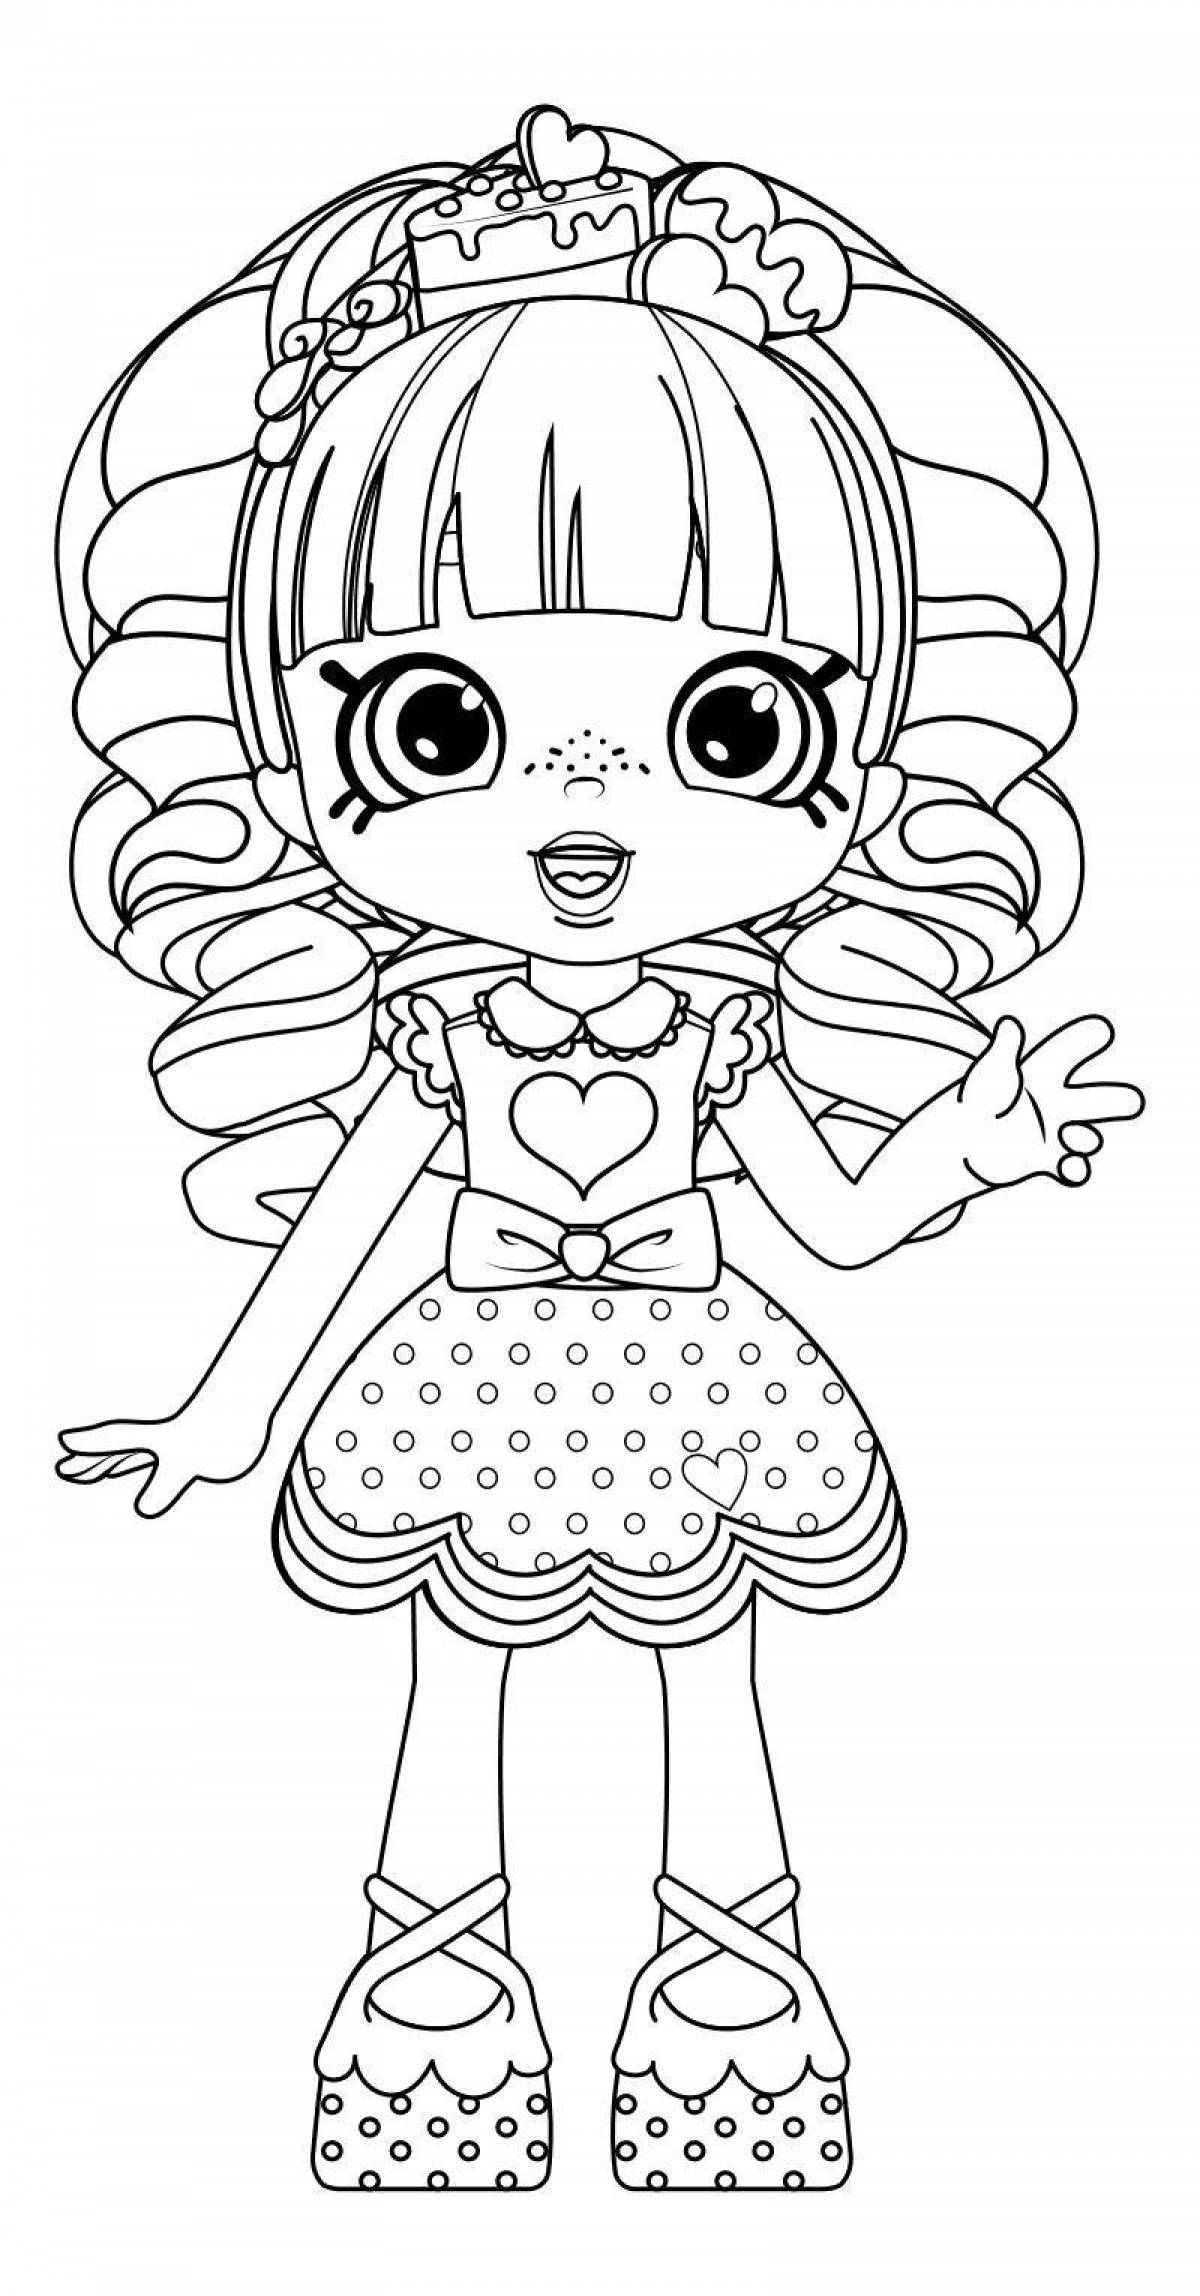 Fun coloring book for dolls